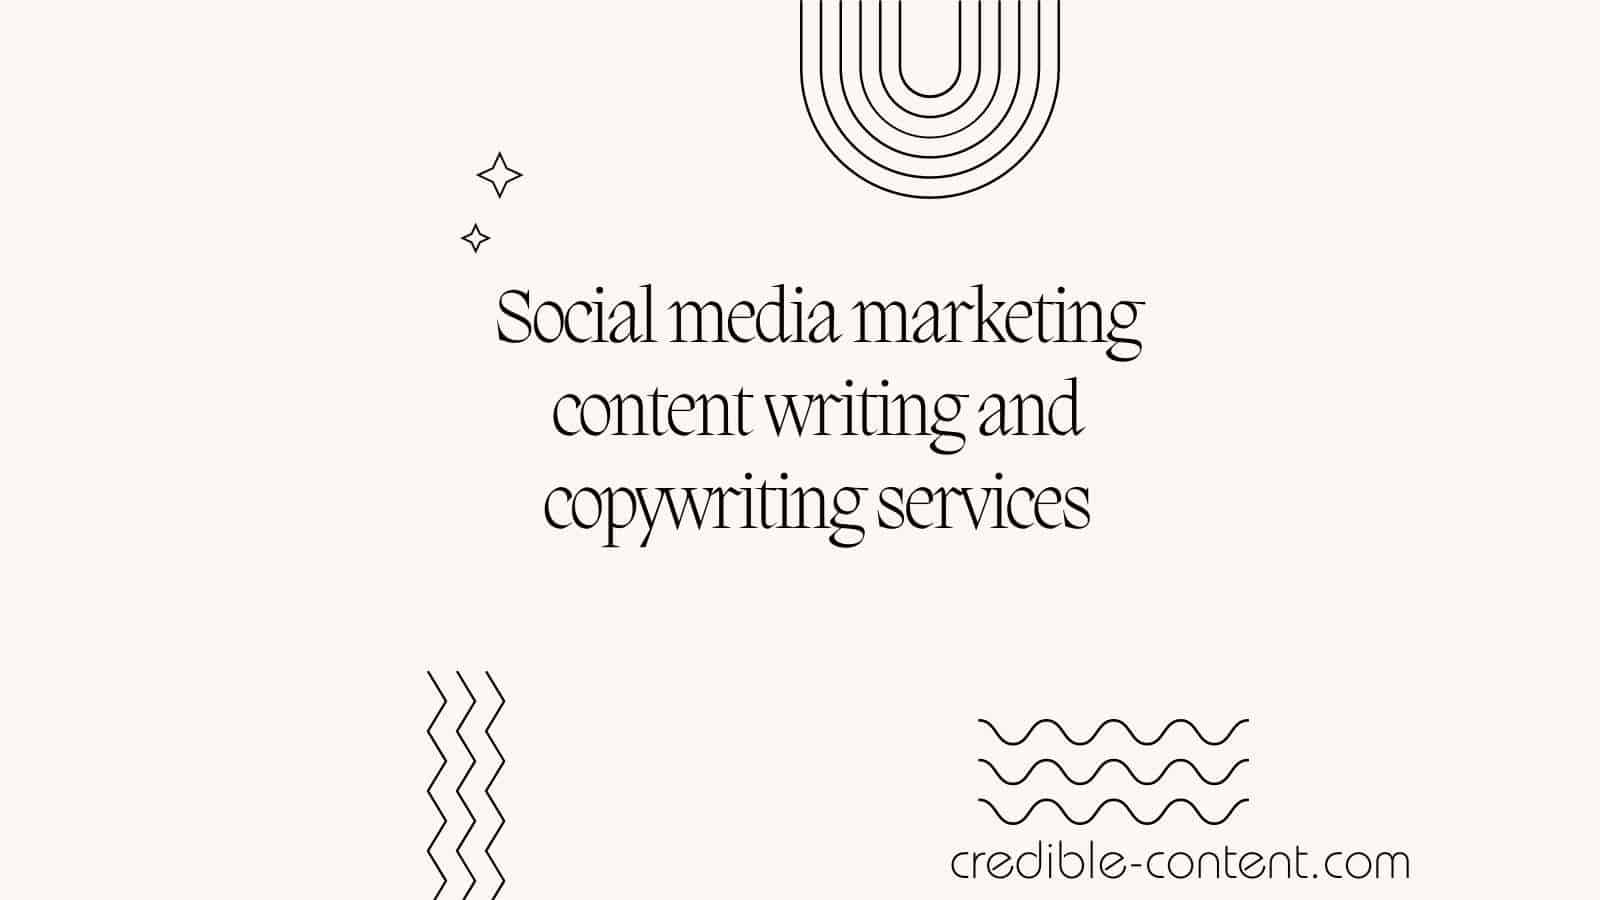 Social media marketing content writing and copywriting services